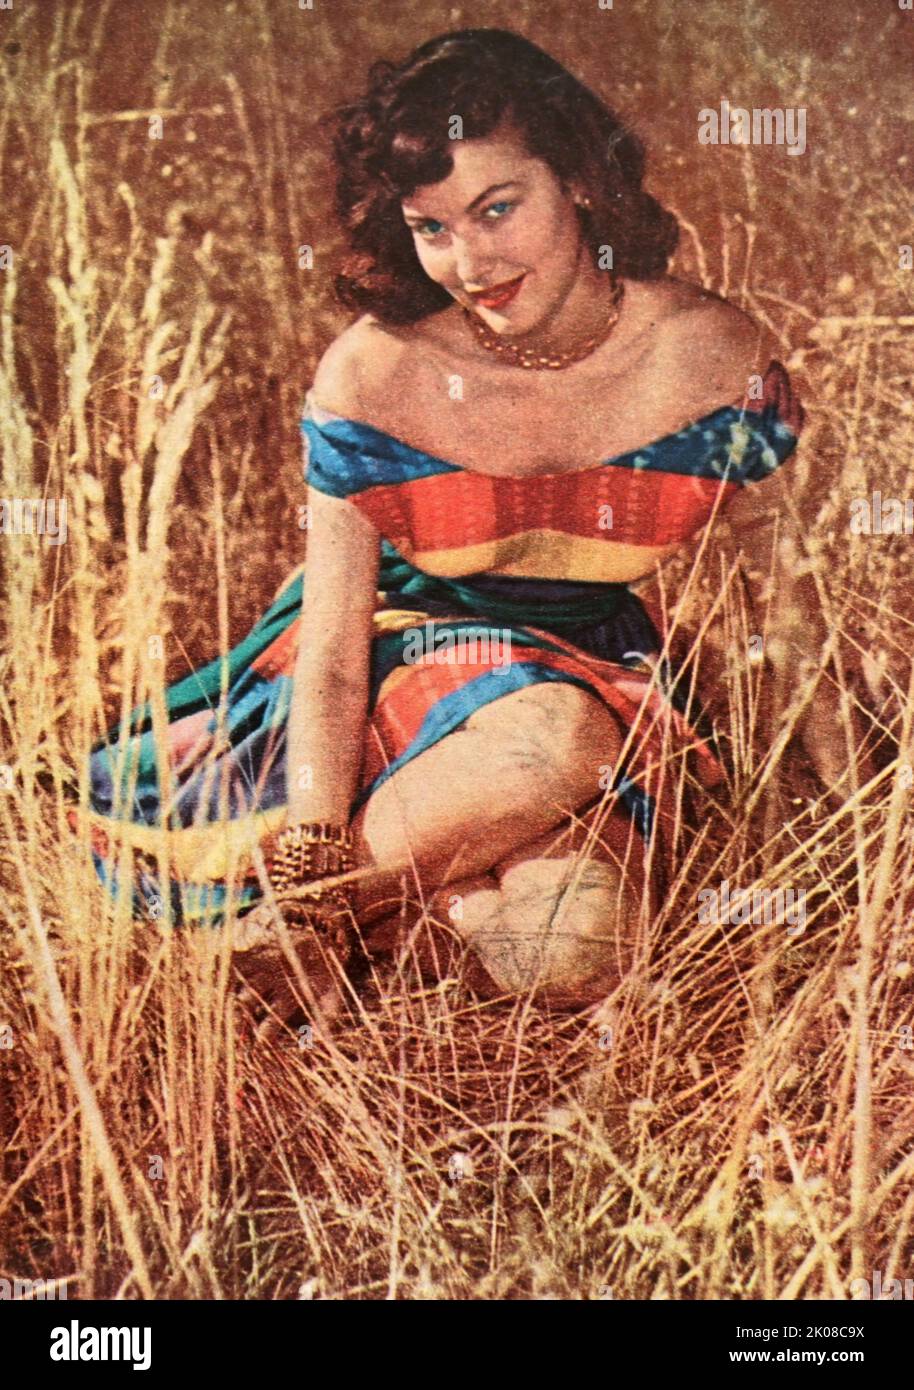 Ava Gardner on the set of Mogambo is a 1953 Technicolor adventure/romantic drama film directed by John Ford also starring Clark Gable and Grace Kelly, and featuring Donald Sinden. Ava Lavinia Gardner (December 24, 1922 - January 25, 1990) was an American actress. In 1999, the American Film Institute ranked Gardner No. 25 on their greatest female screen legends of classic American cinema list Stock Photo